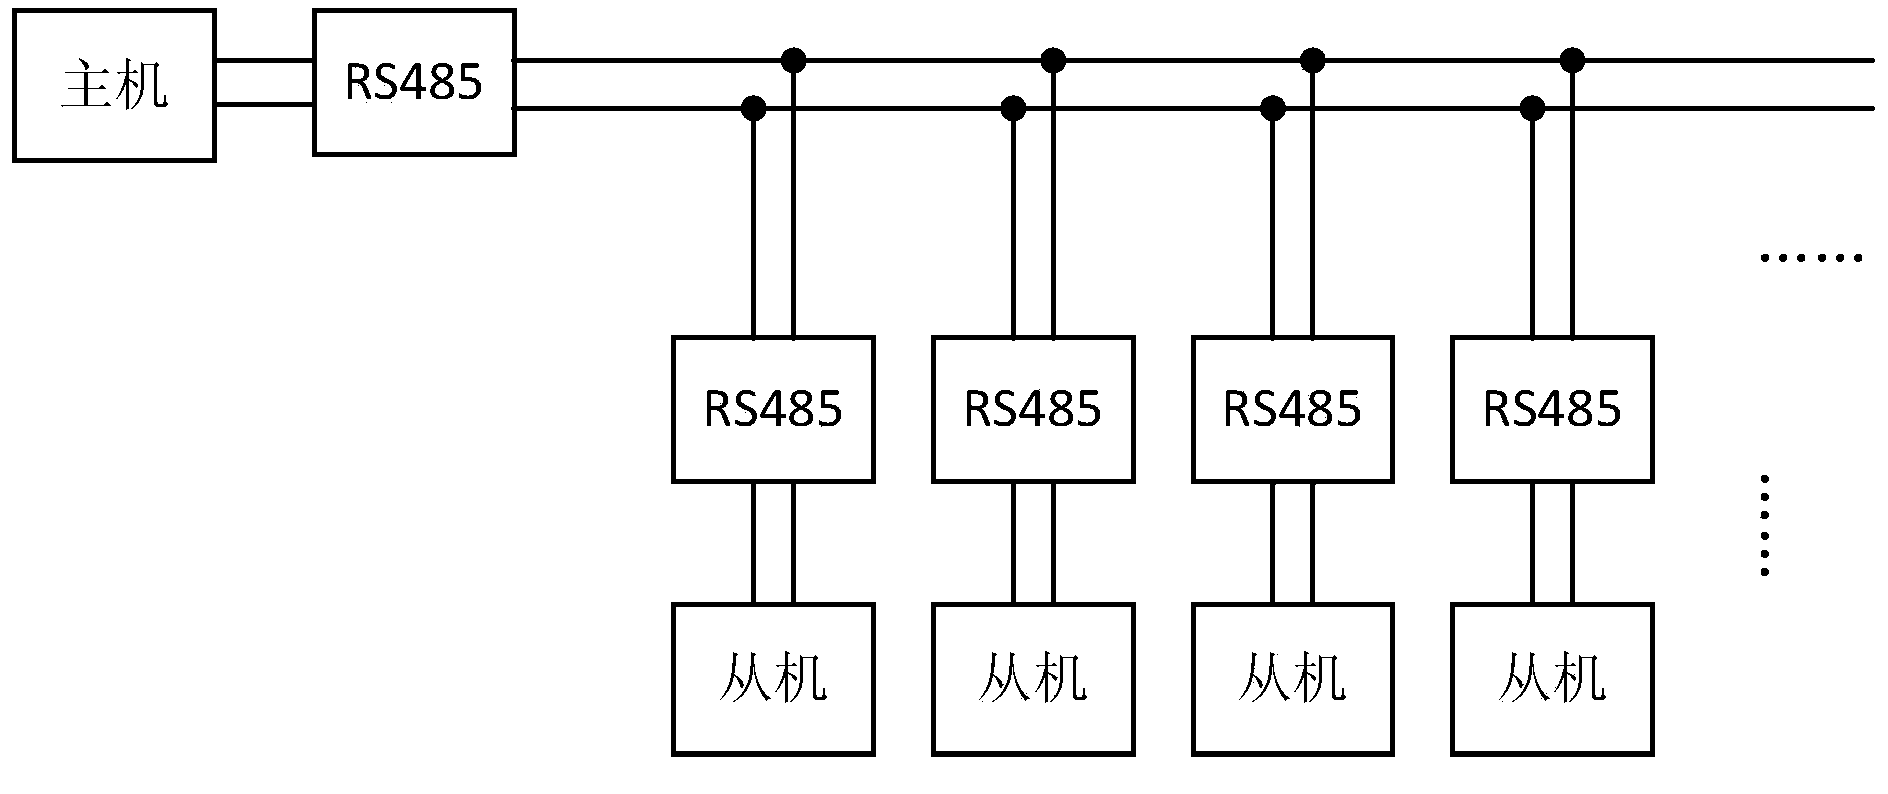 Dynamic networking method and communication method based on RS-485